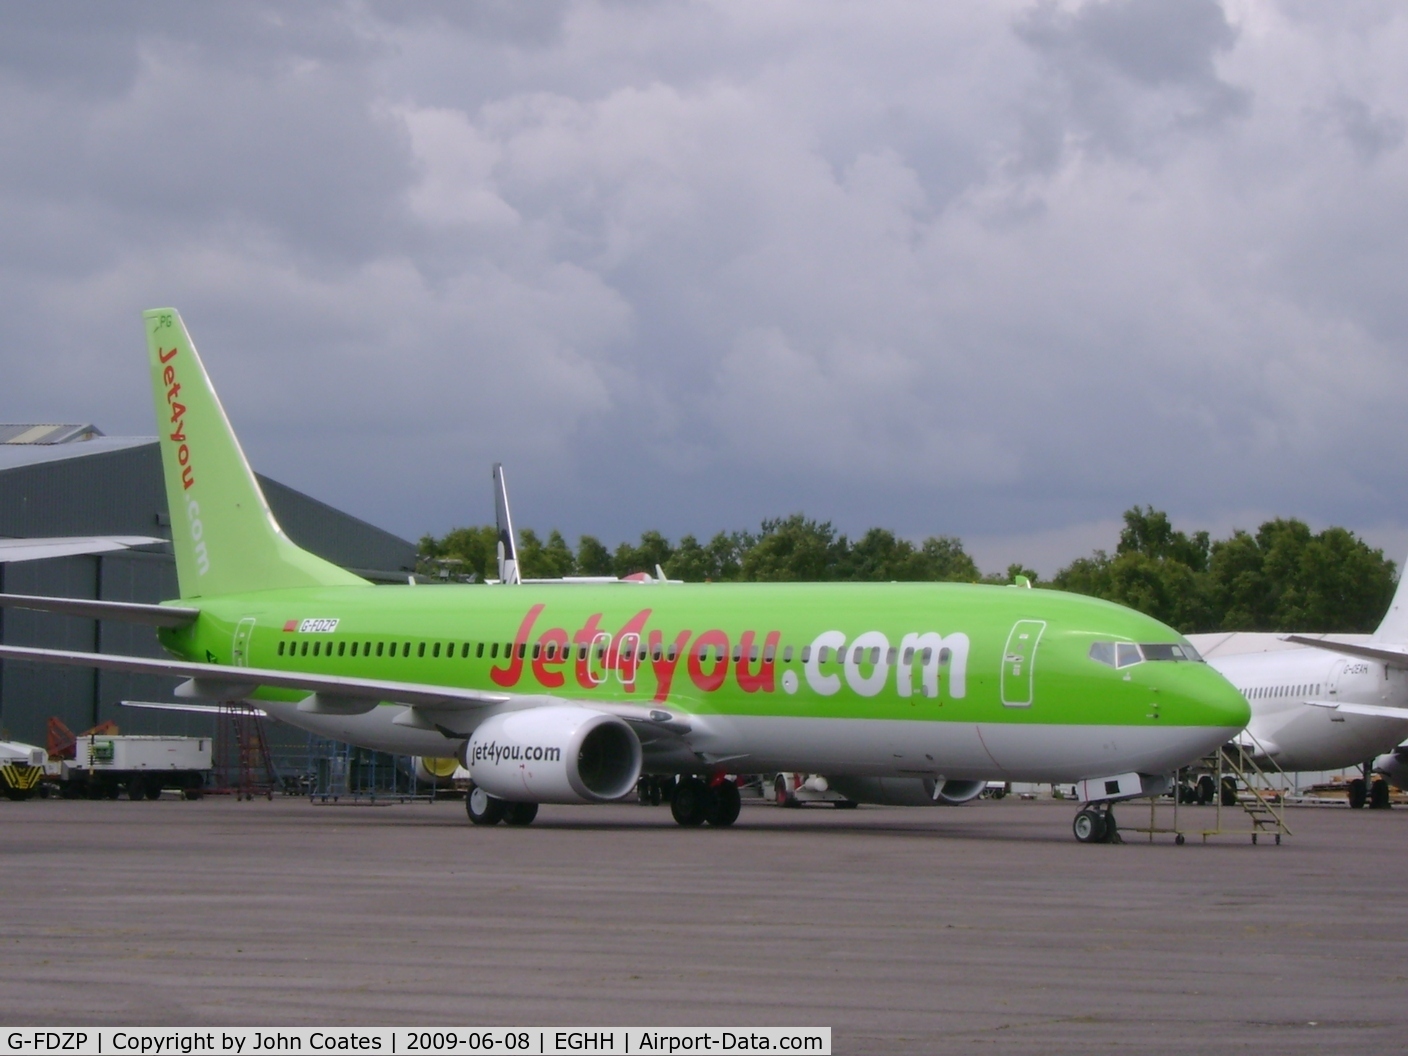 G-FDZP, 2007 Boeing 737-8K5 C/N 34692, Just painted and to be CN-RPG for Jet4You